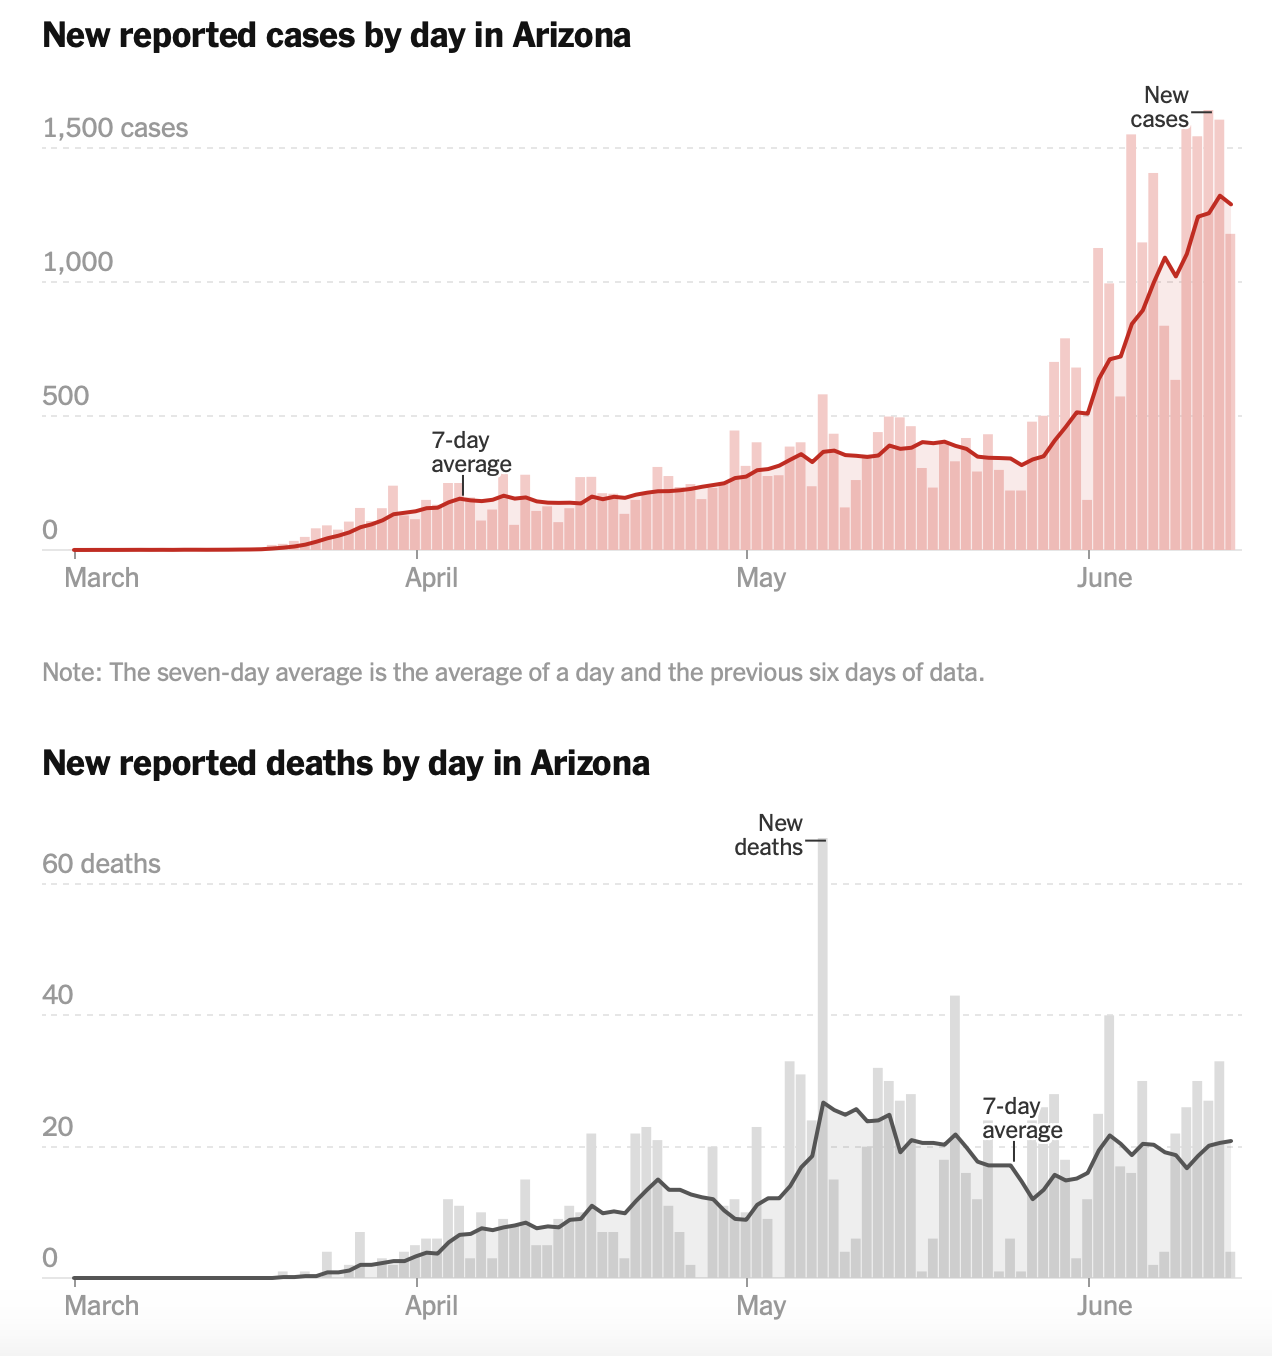 The trend in both confirmed COVID-19 cases and deaths in Arizona as of June 15, according to The New York Times.